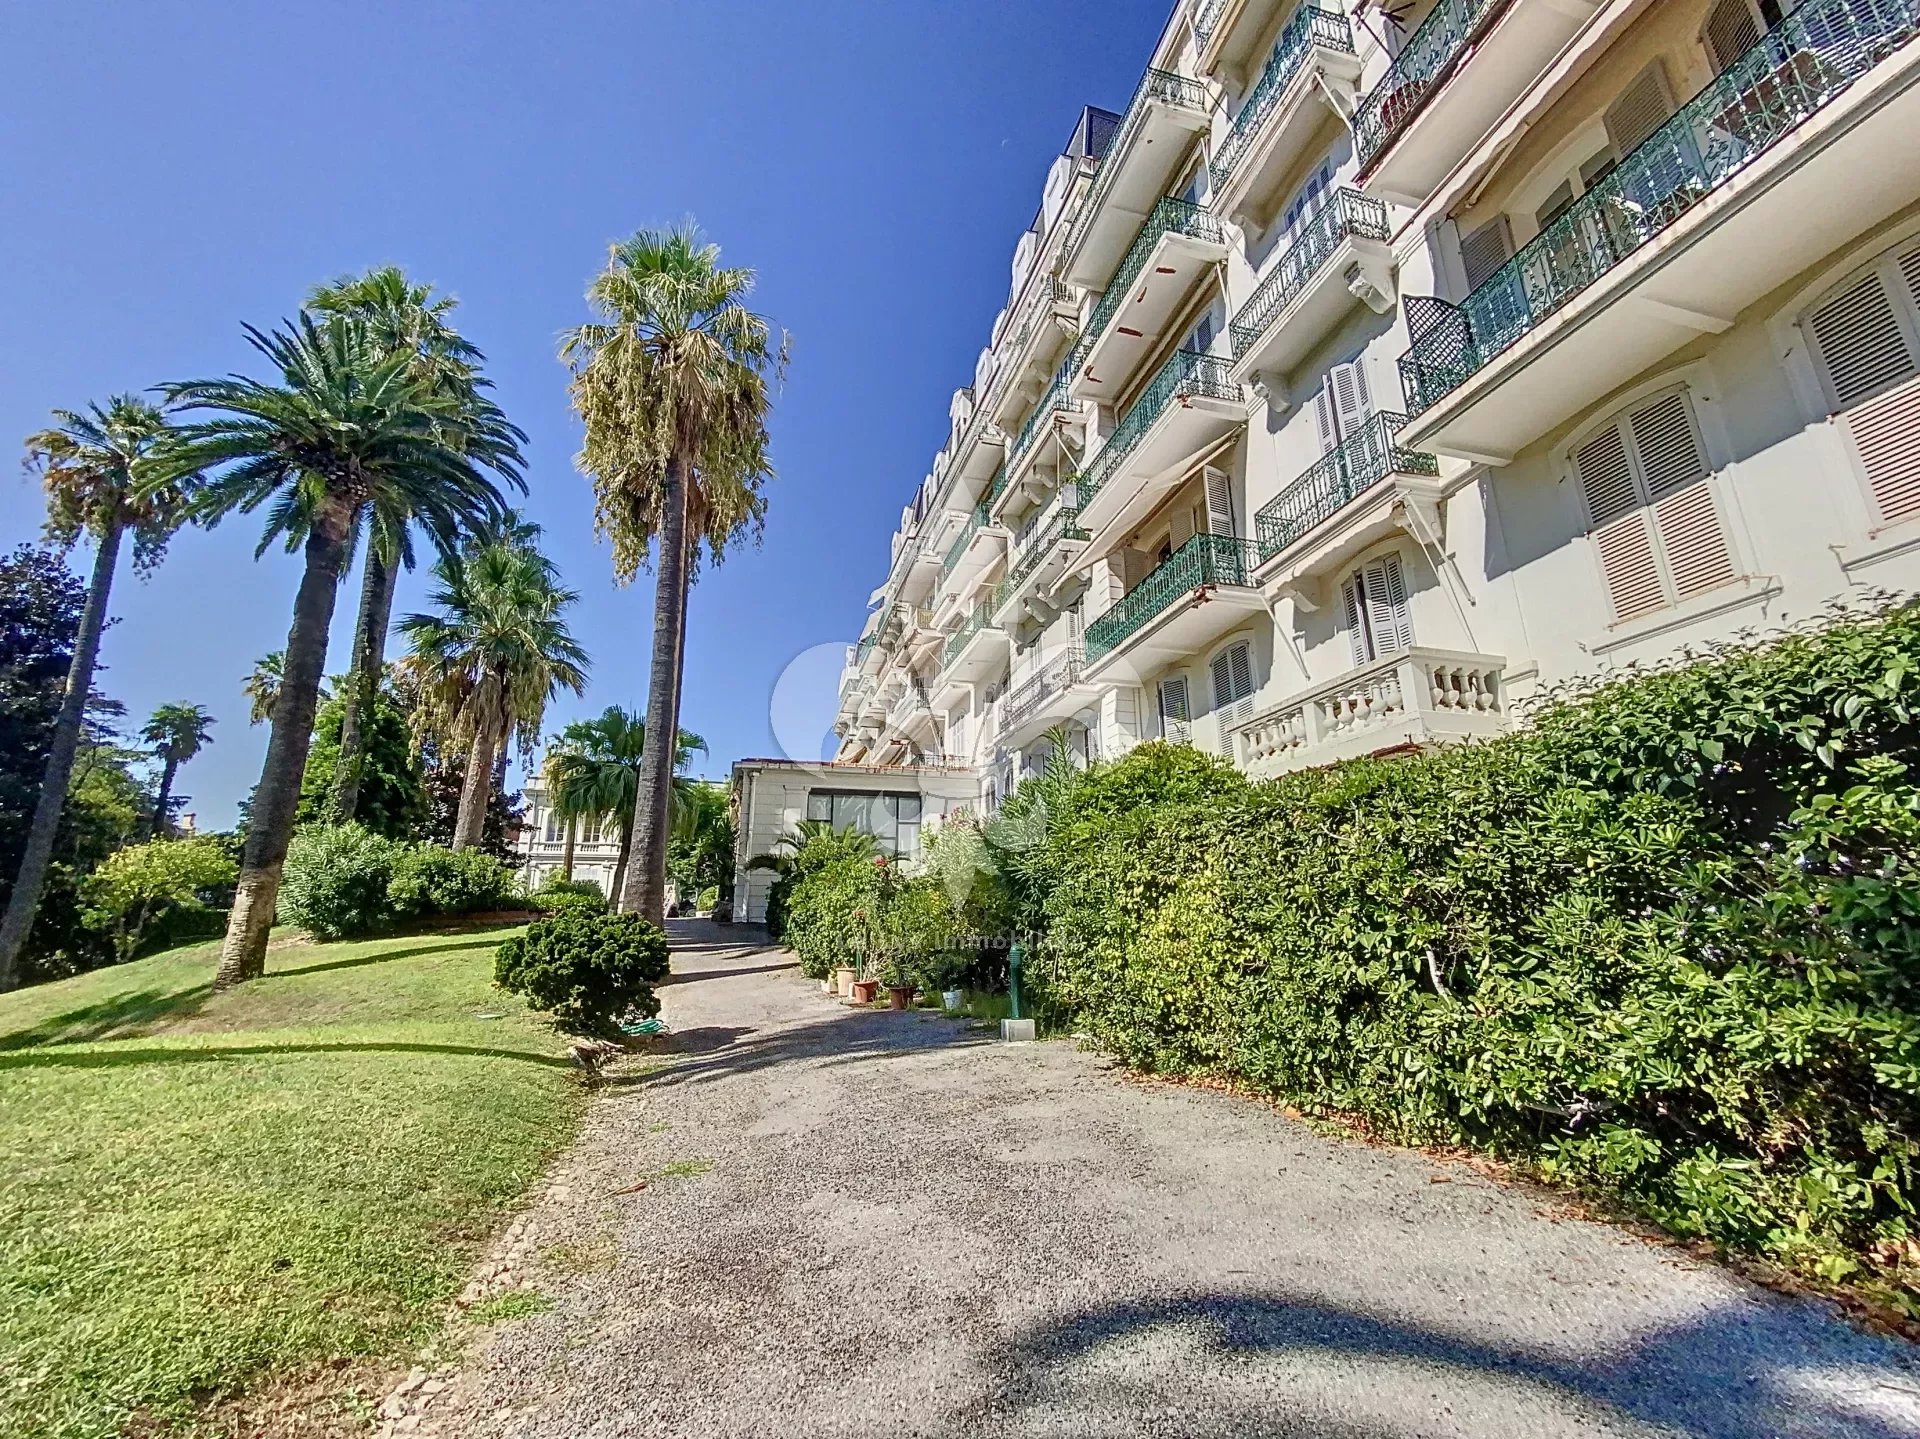 Cannes : Beautiful apartment in a bourgeois building